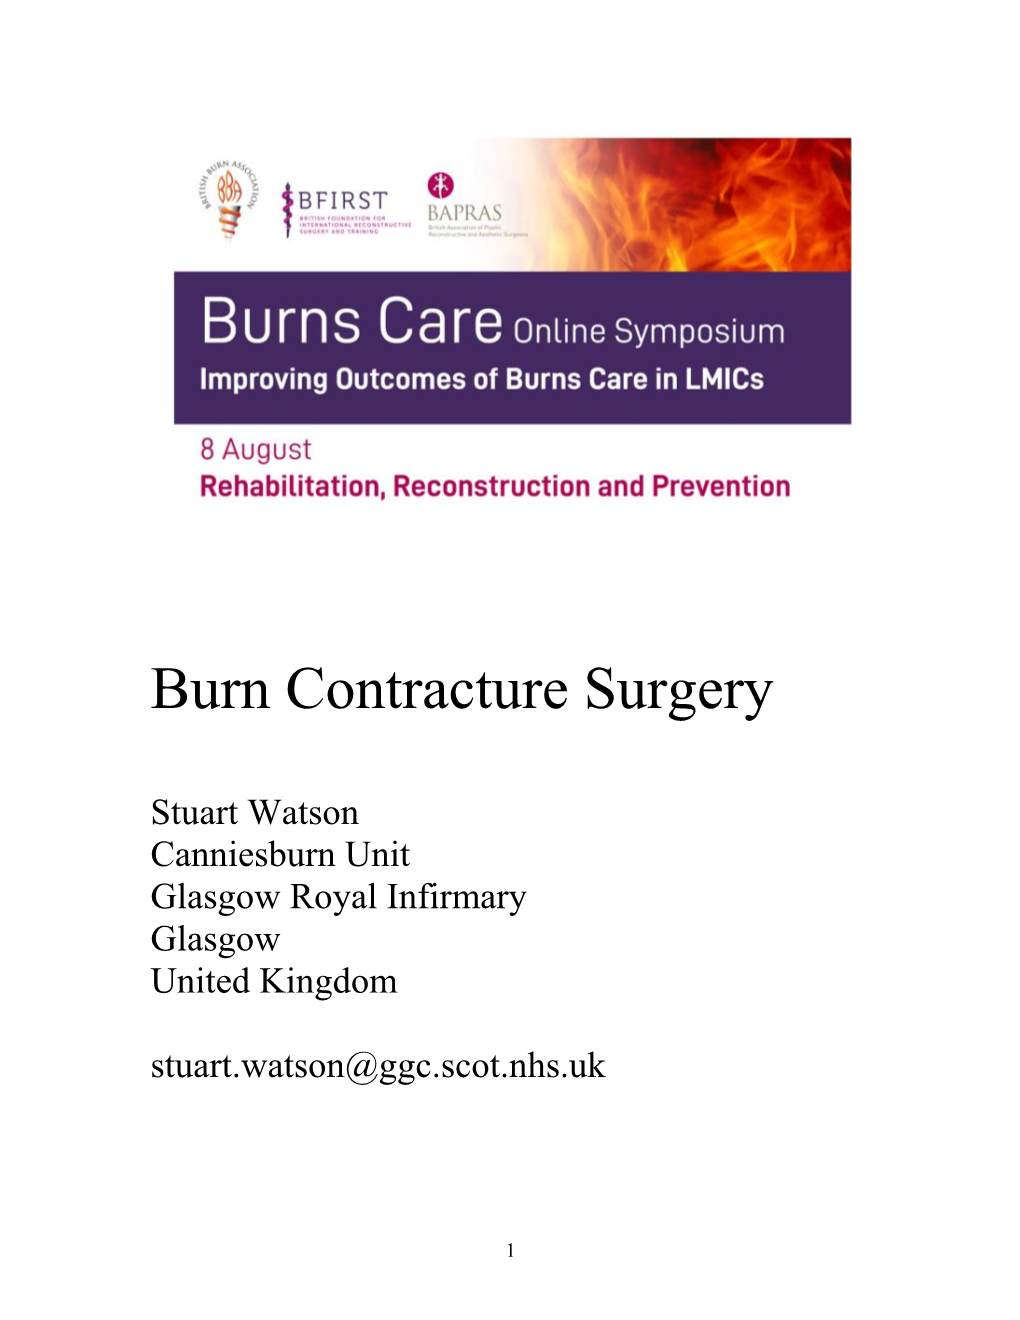 Burn Contracture Surgery